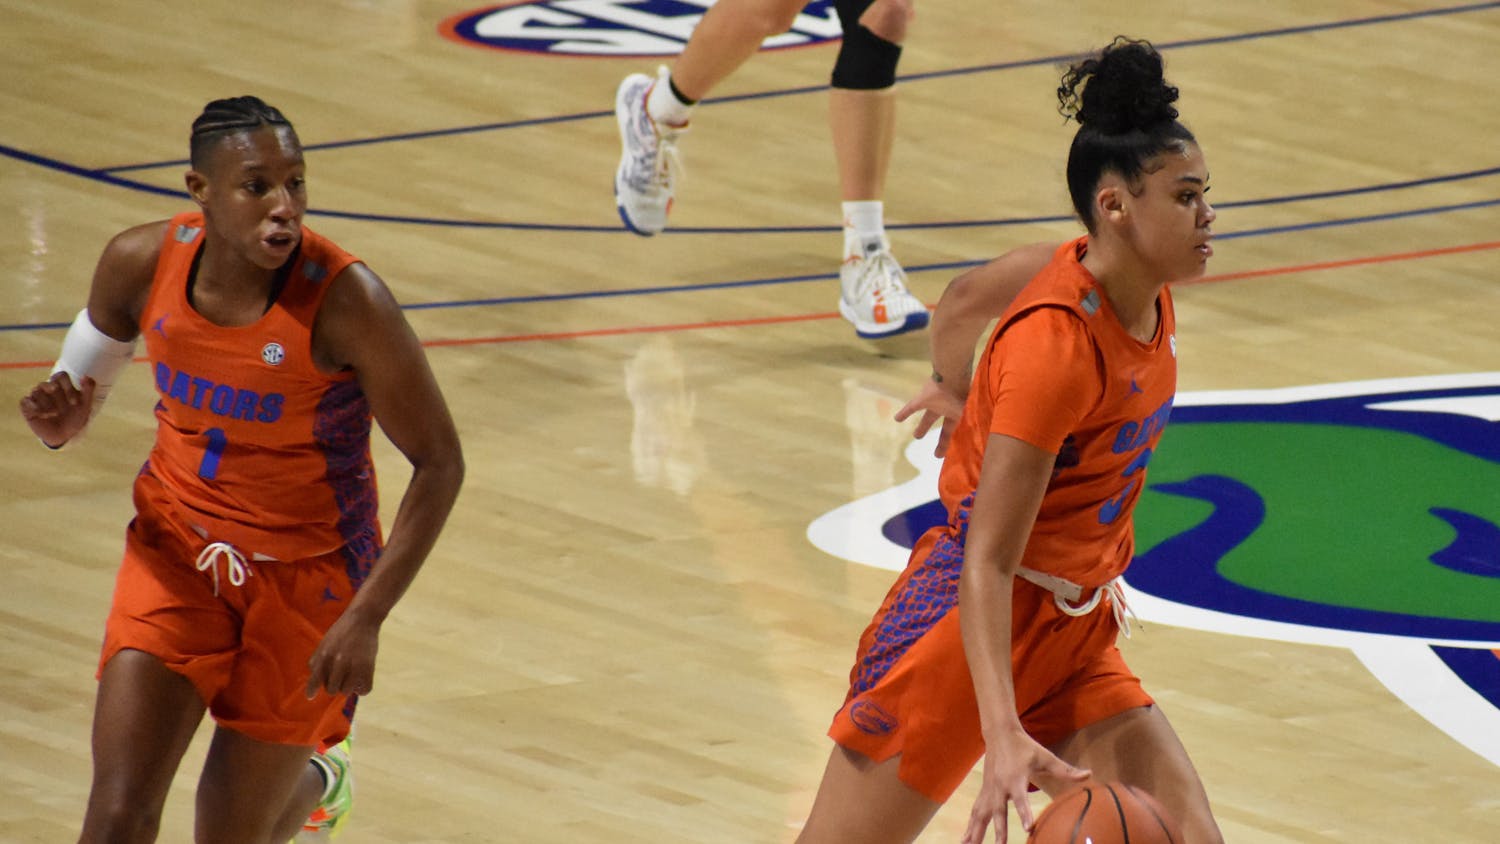 Kiki Smith (left) and Lavender Briggs (right), pictured during a game against Mizzou game Jan. 28. Smith scored a game-high 28 points for the Gators Sunday.